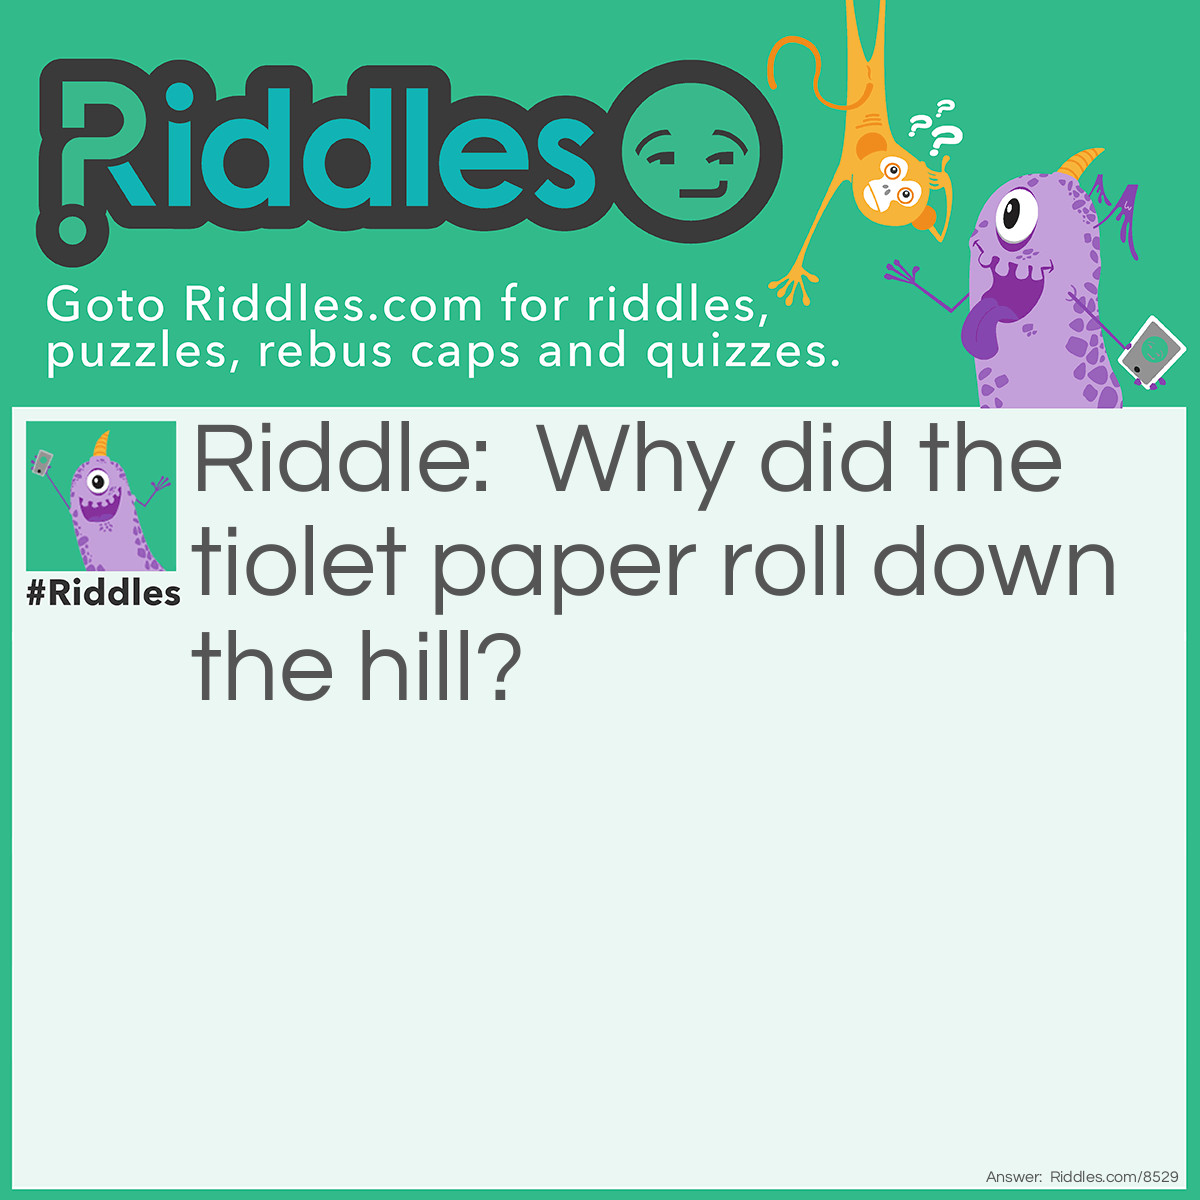 Riddle: Why did the tiolet paper roll down the hill? Answer: To get to the bottom.